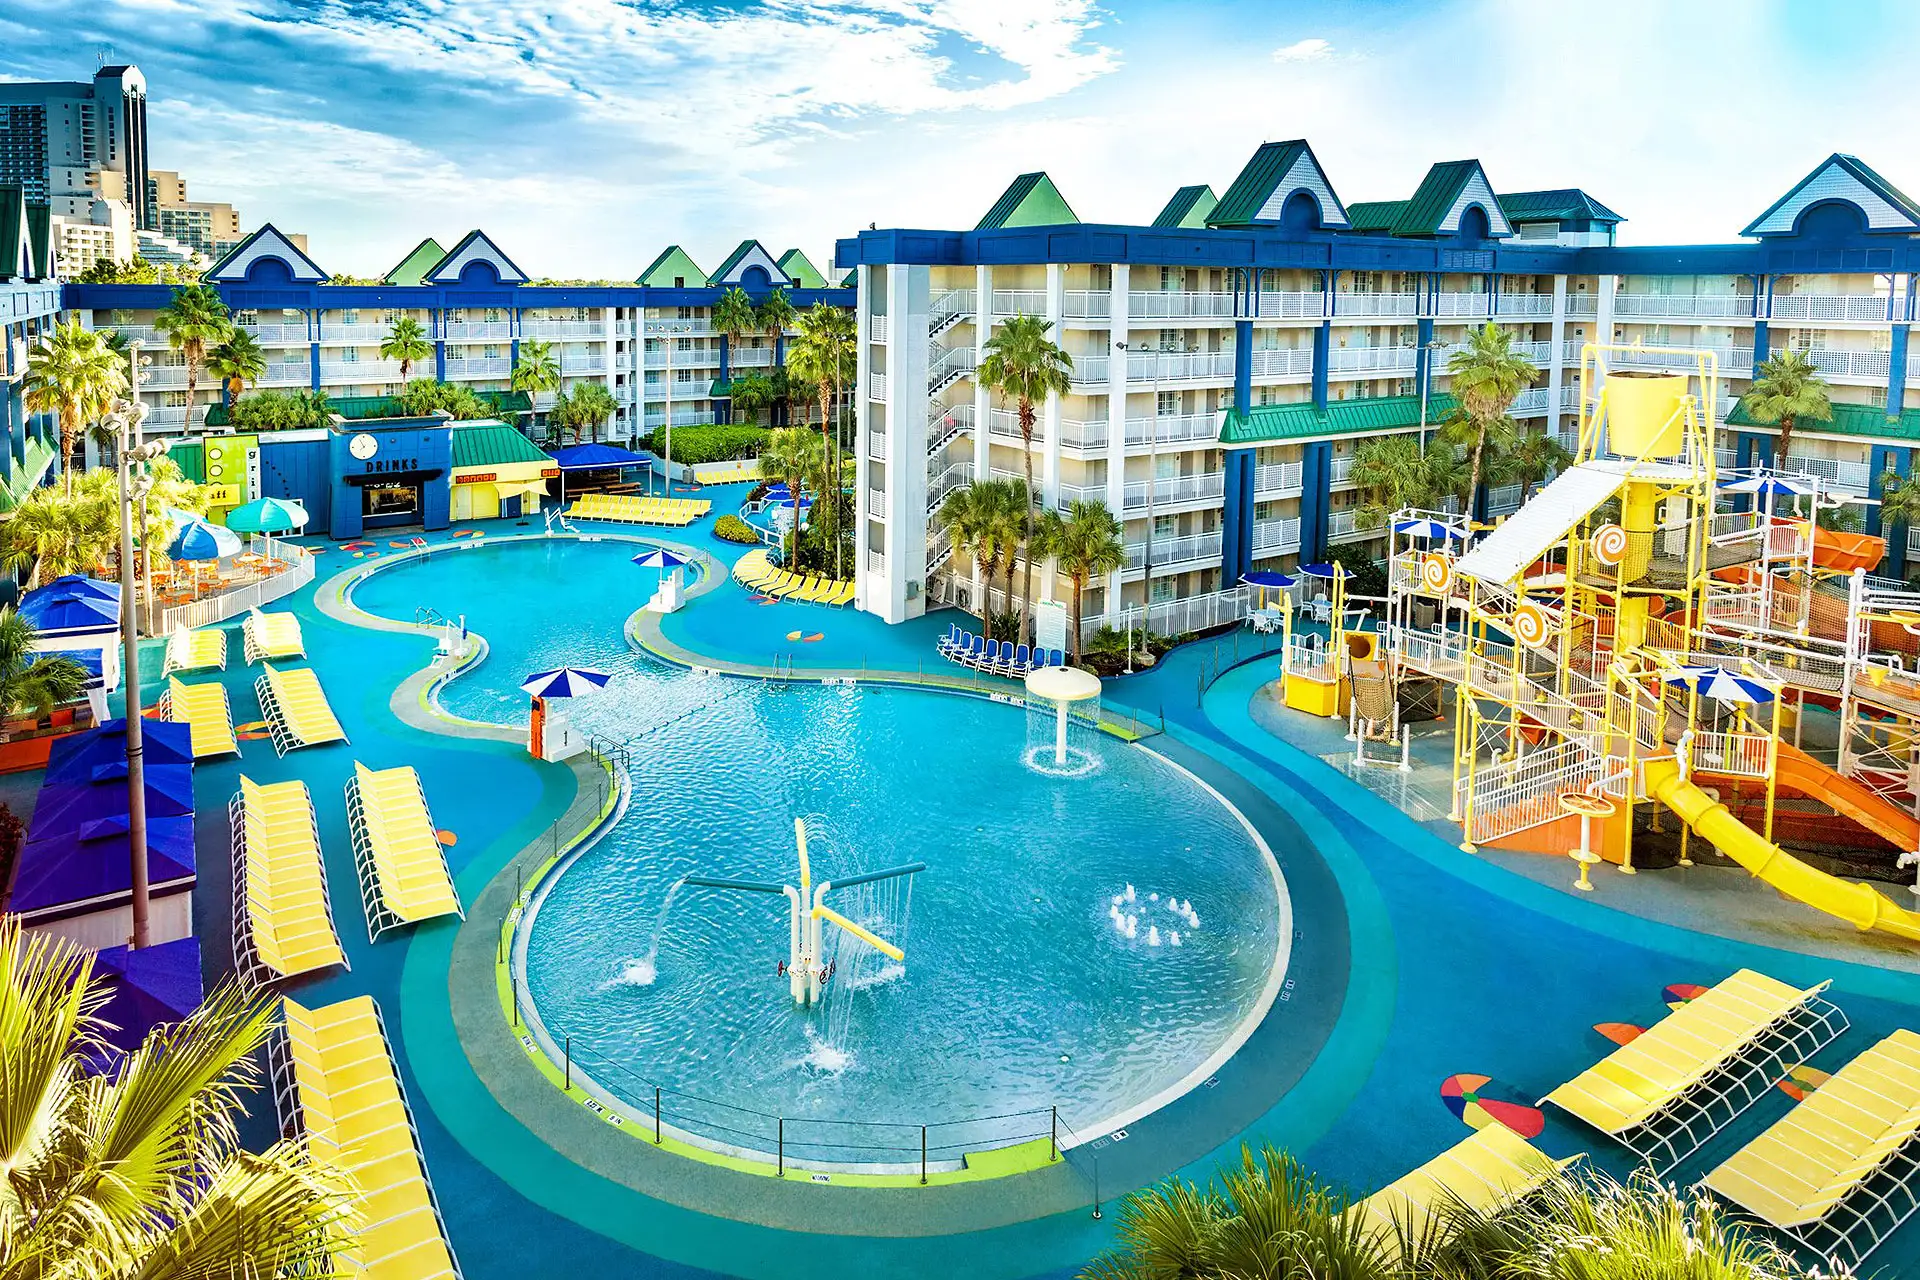 Water Park at Holiday Inn Orlando Suites - Waterpark; Courtesy of Holiday Inn Orlando Suites - Waterpark